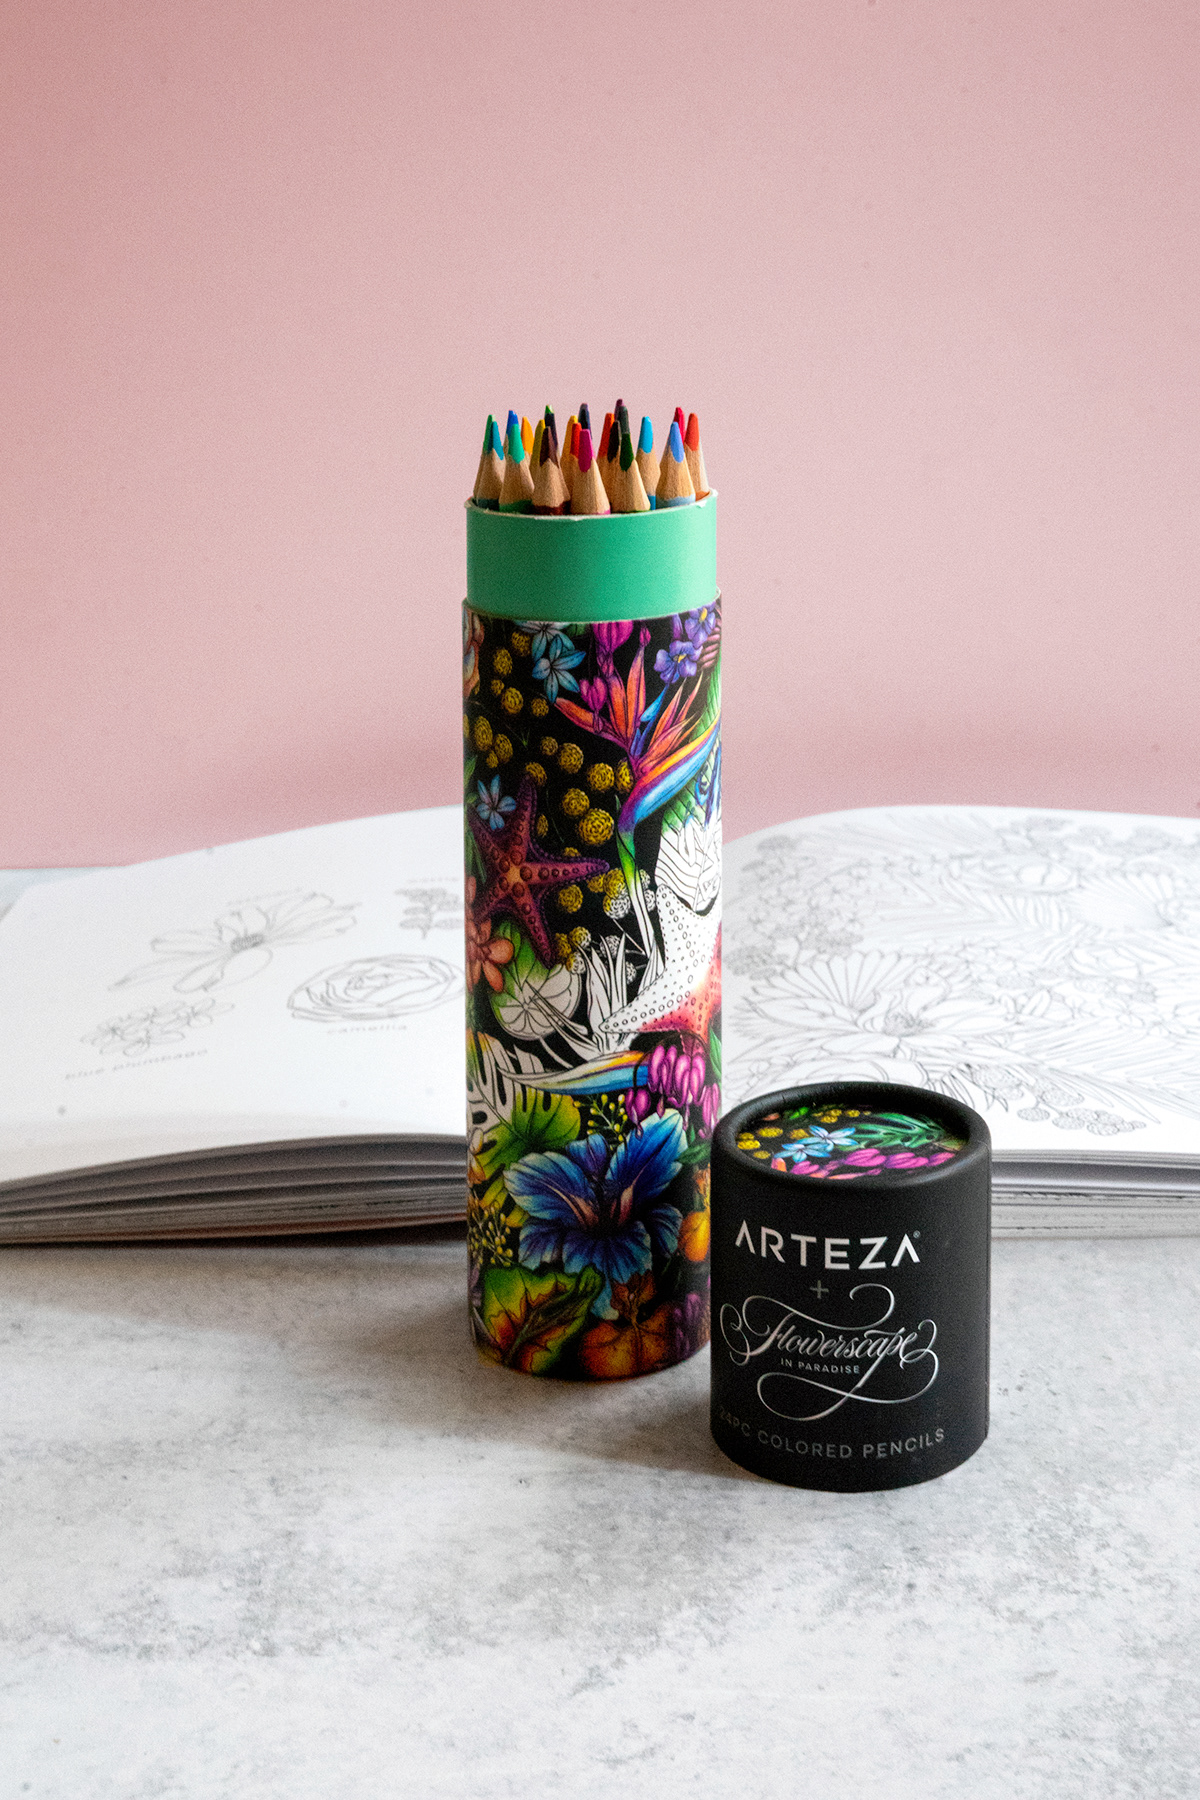 image of colored pencils in a tube, package is covered in tropical flowers.